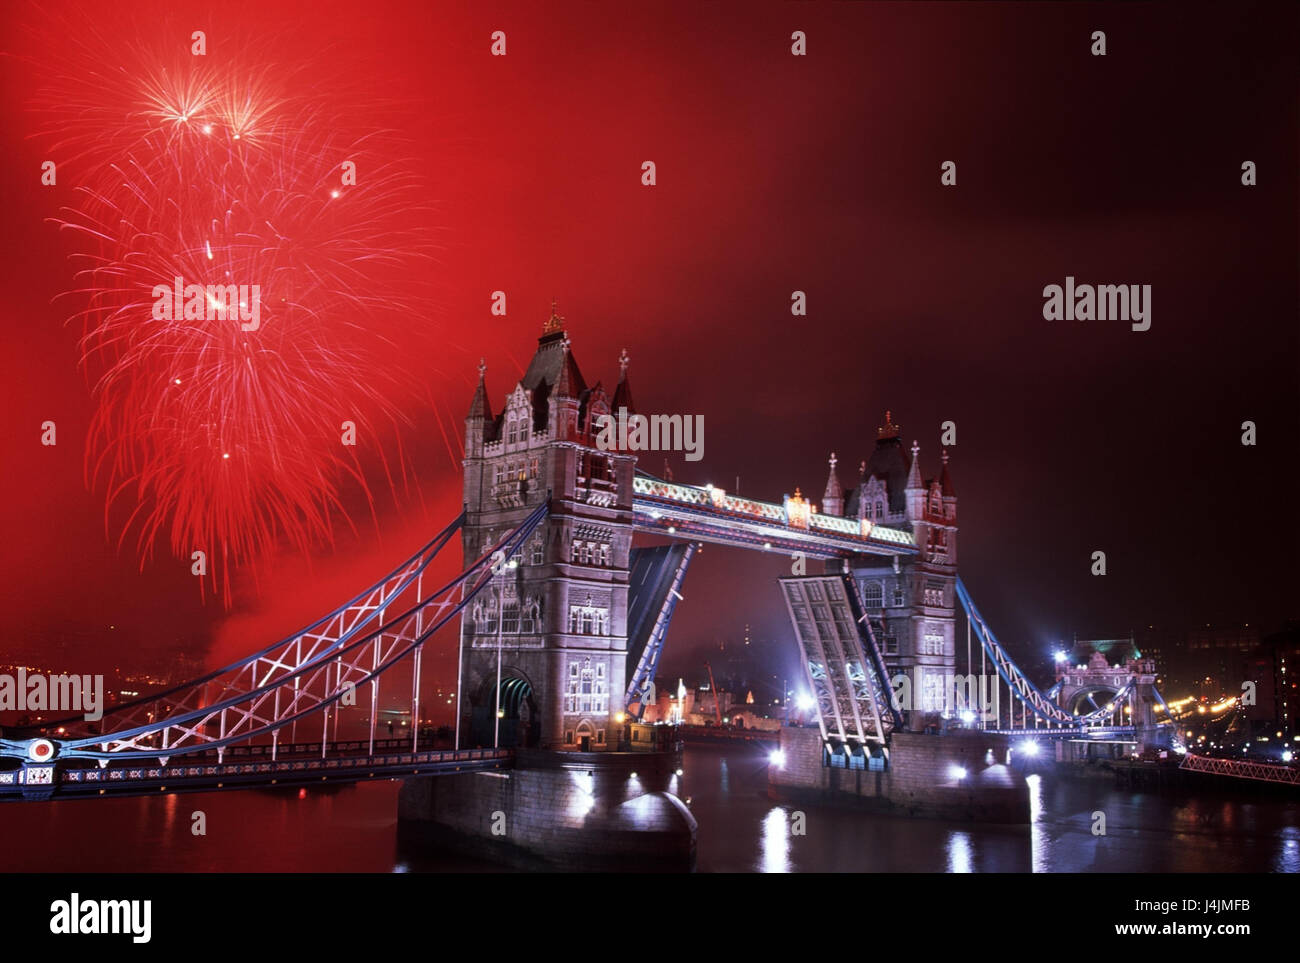 Great Britain, London, Tower Bridge, fireworks [M] England, the Thames, place of interest, structure, lighting, New Year's Eve, rockets, night, at night Stock Photo